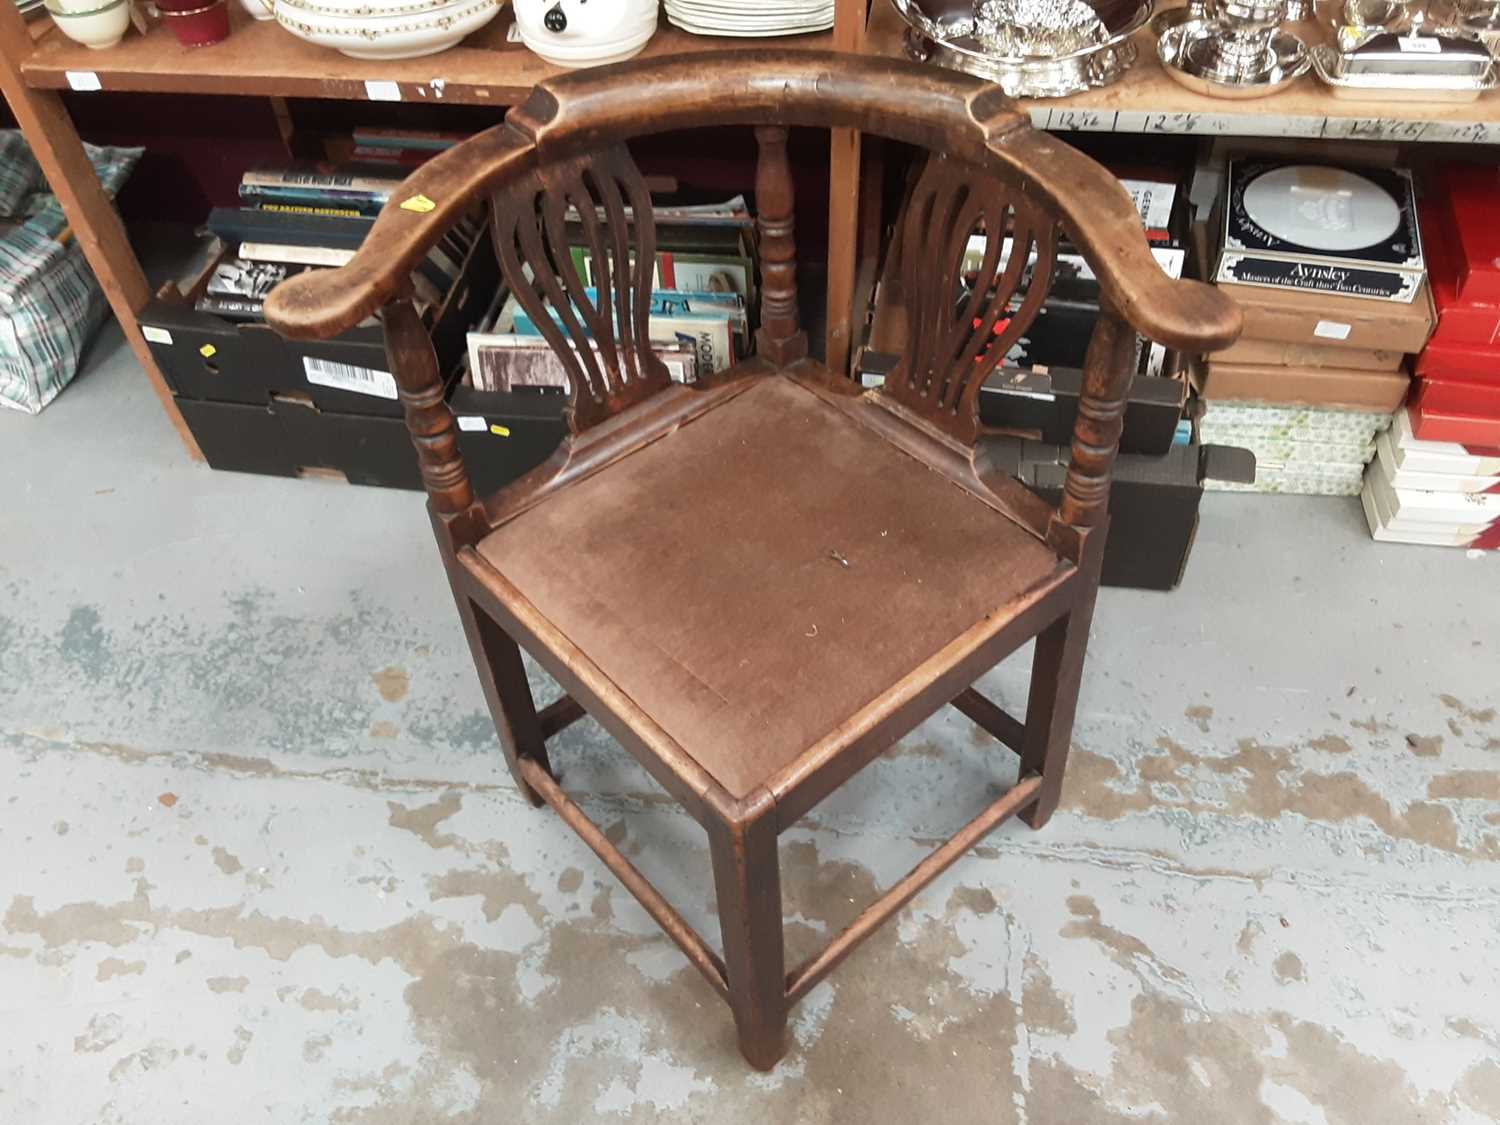 Lot 871 - Early 19th century elm Corner chair with drop in seat